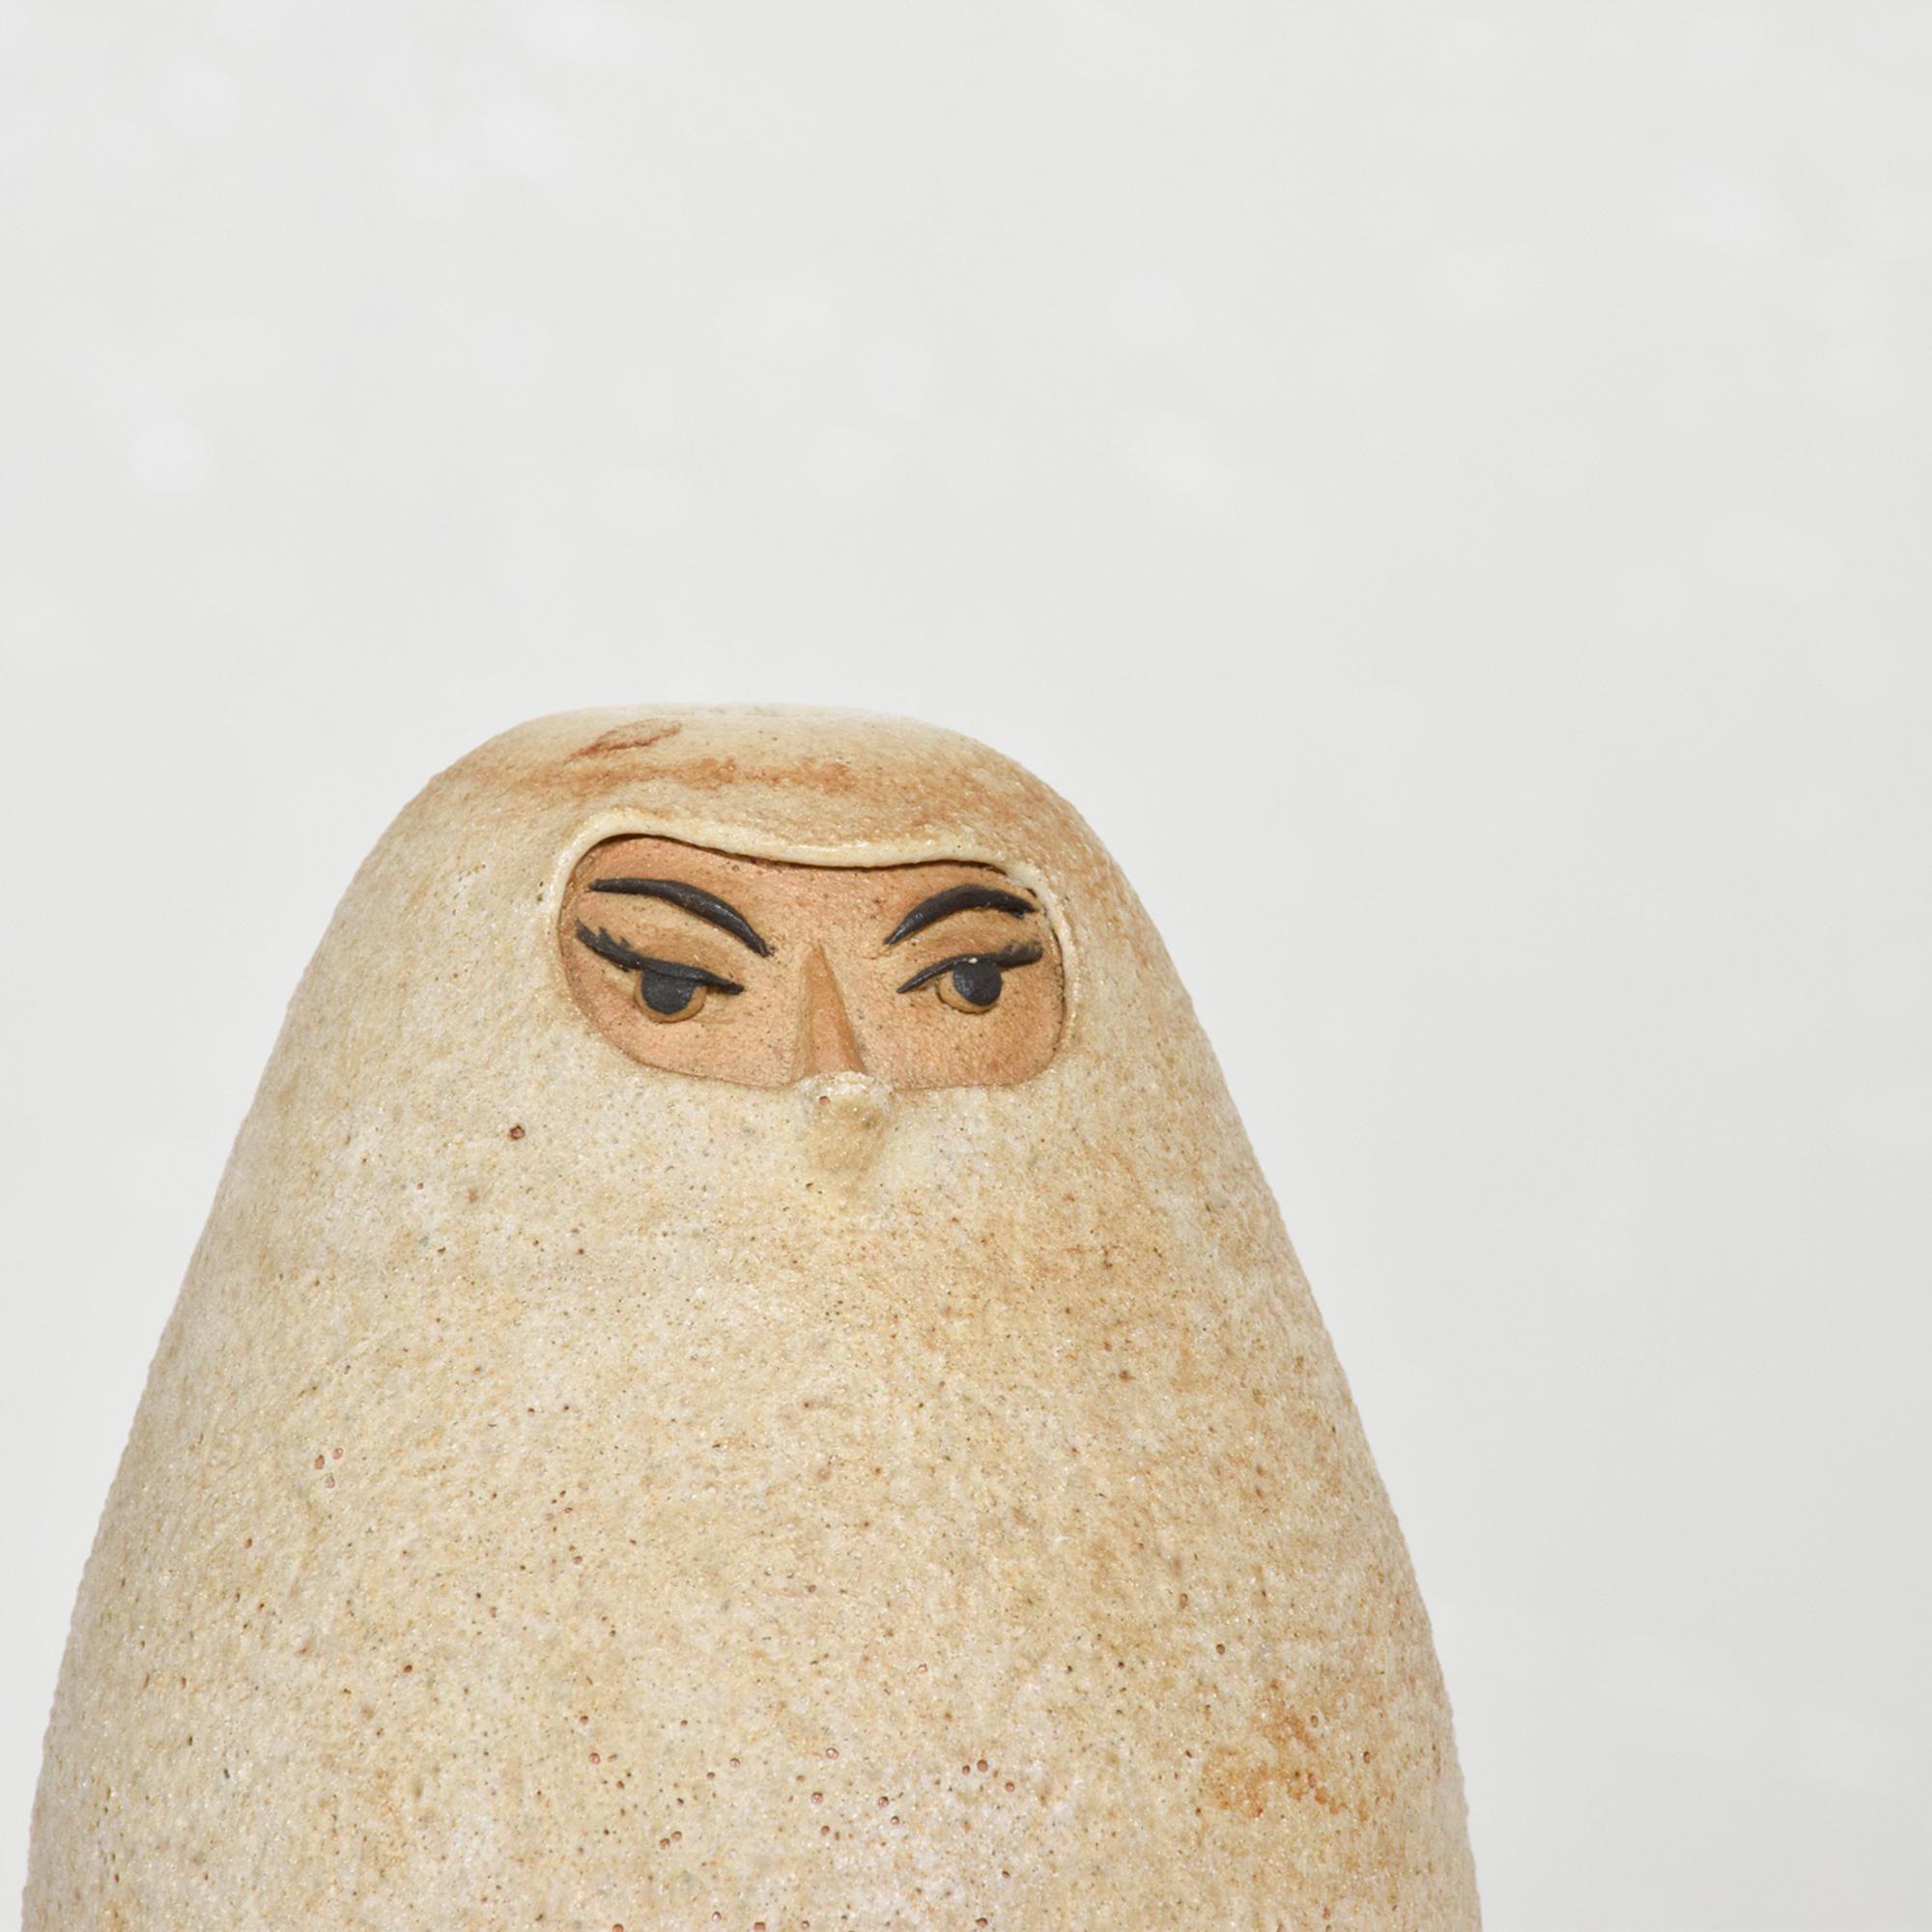 Bernice Huber Lidded Pottery Vessel with Painted Makeup Eyes California, 1960s 3